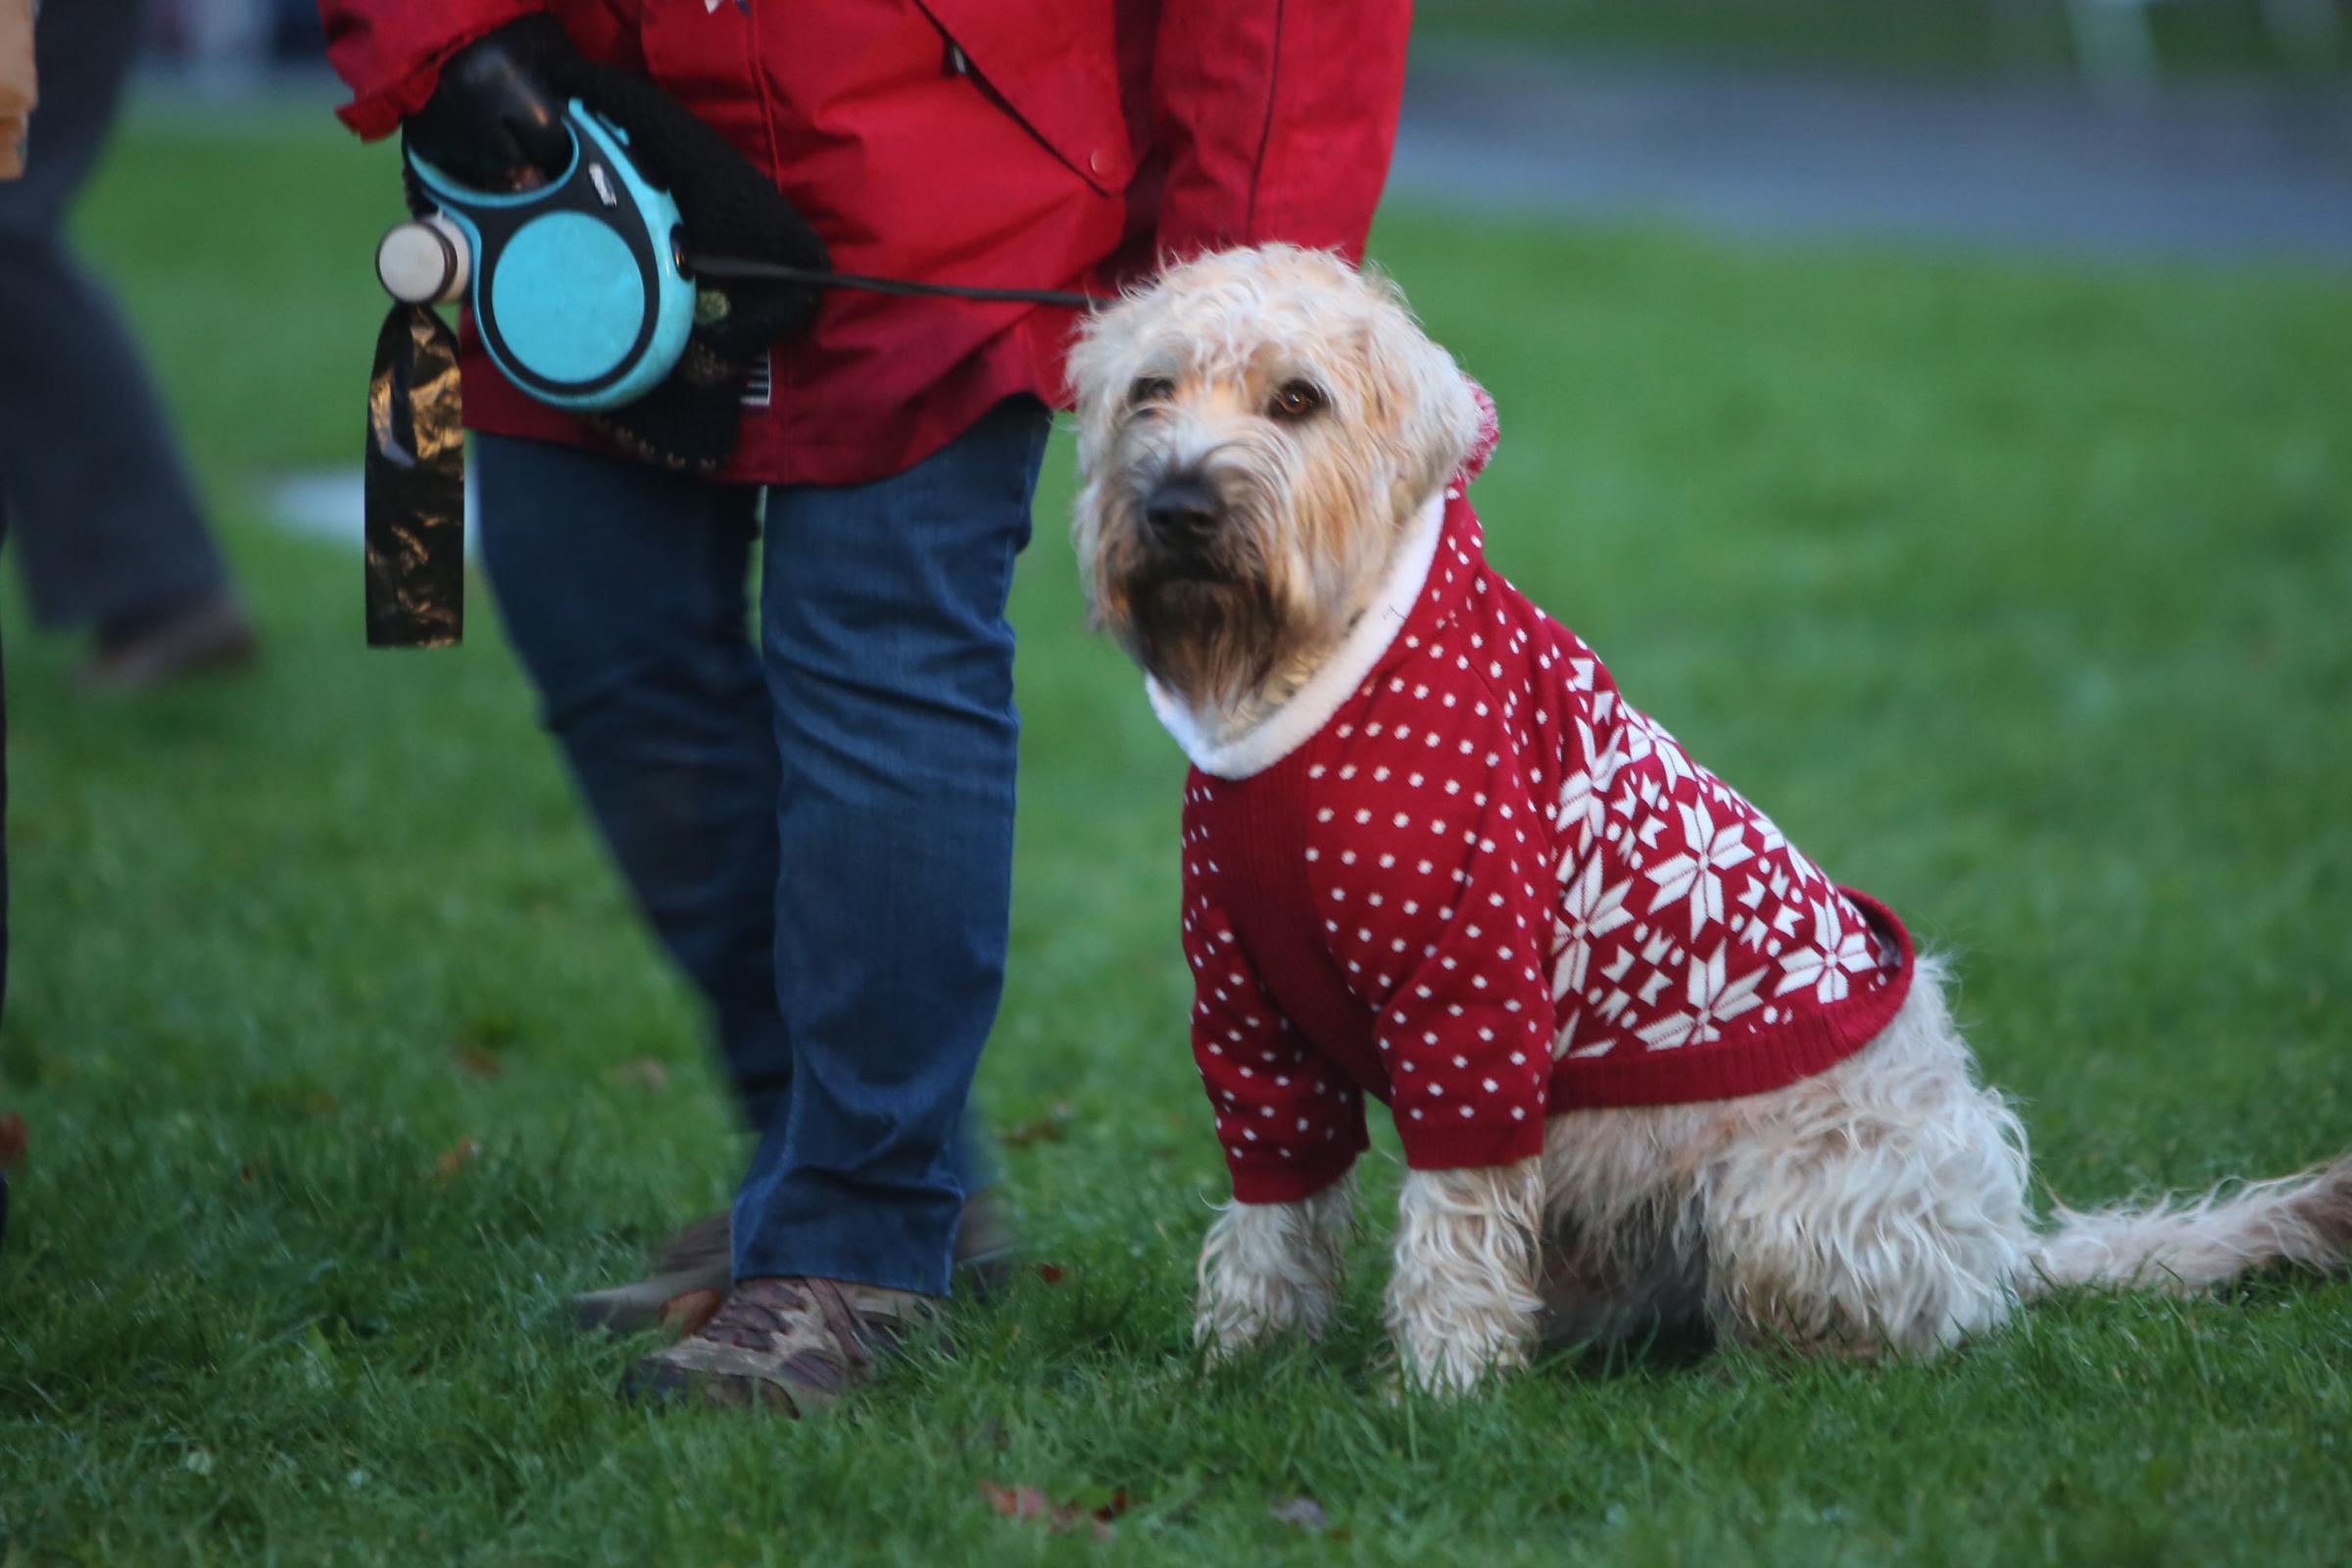 Here are four ‘pawfect’ events to enjoy with your four-legged friend in Dorset over the festive season...